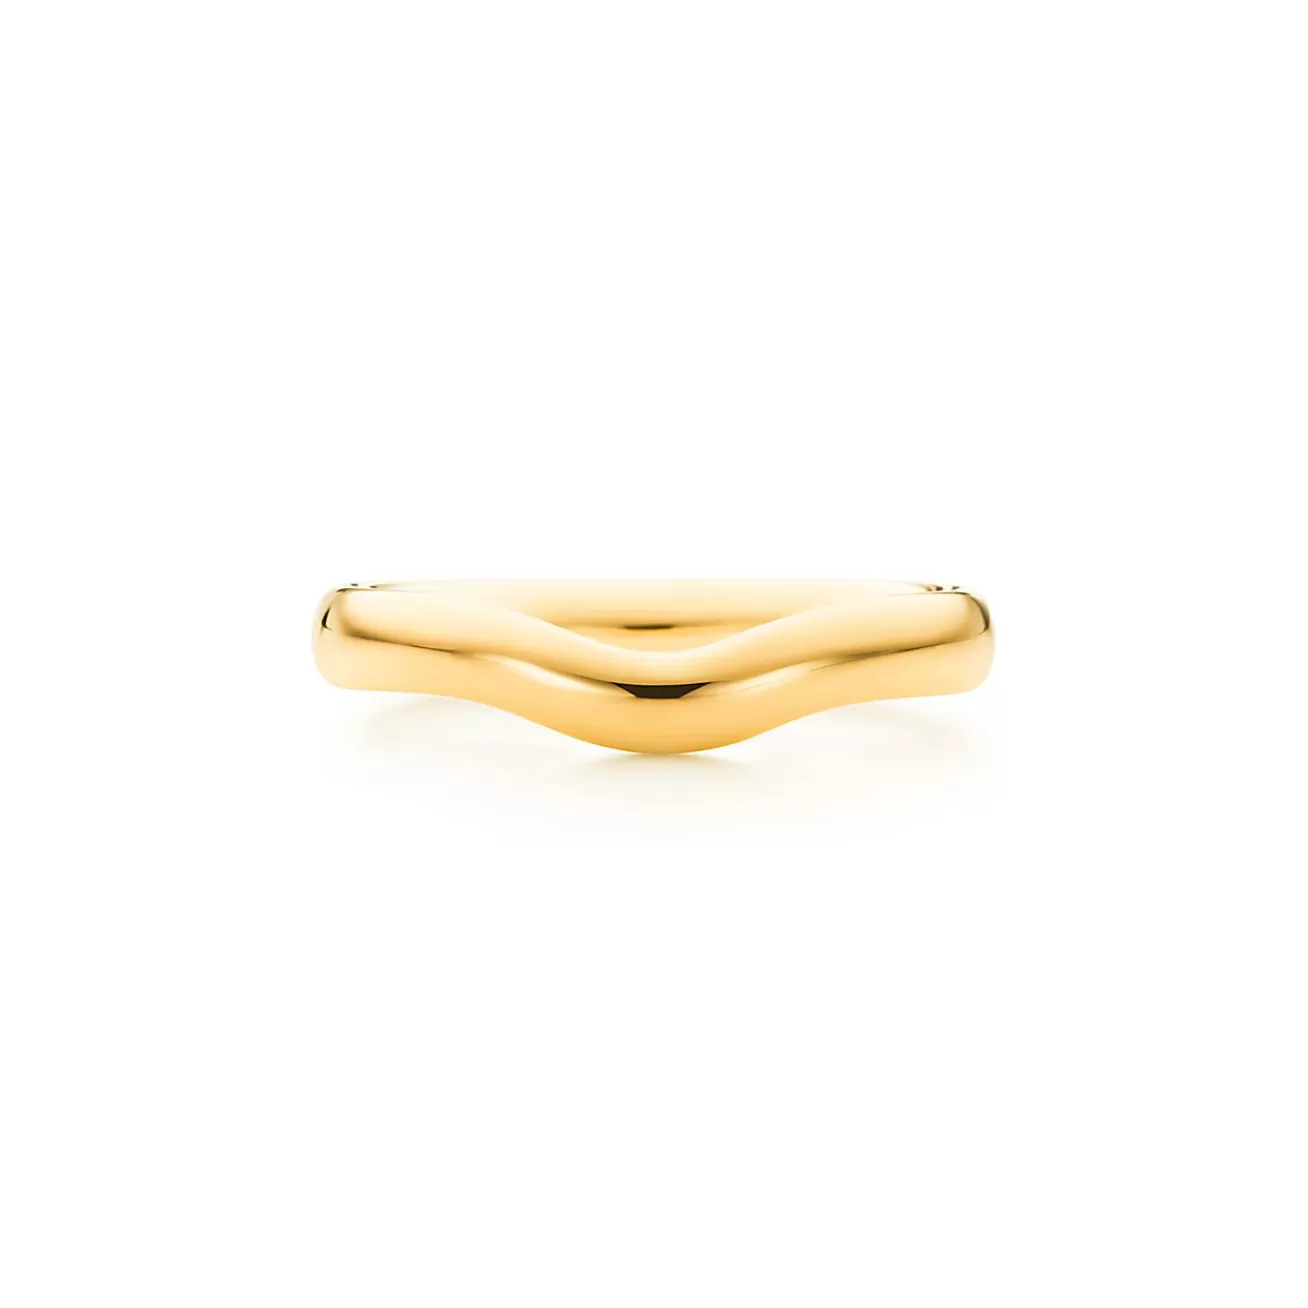 Tiffany & Co. Elsa Peretti® wedding band ring in 18k gold, 3 mm wide. | ^ Rings | Gold Jewelry